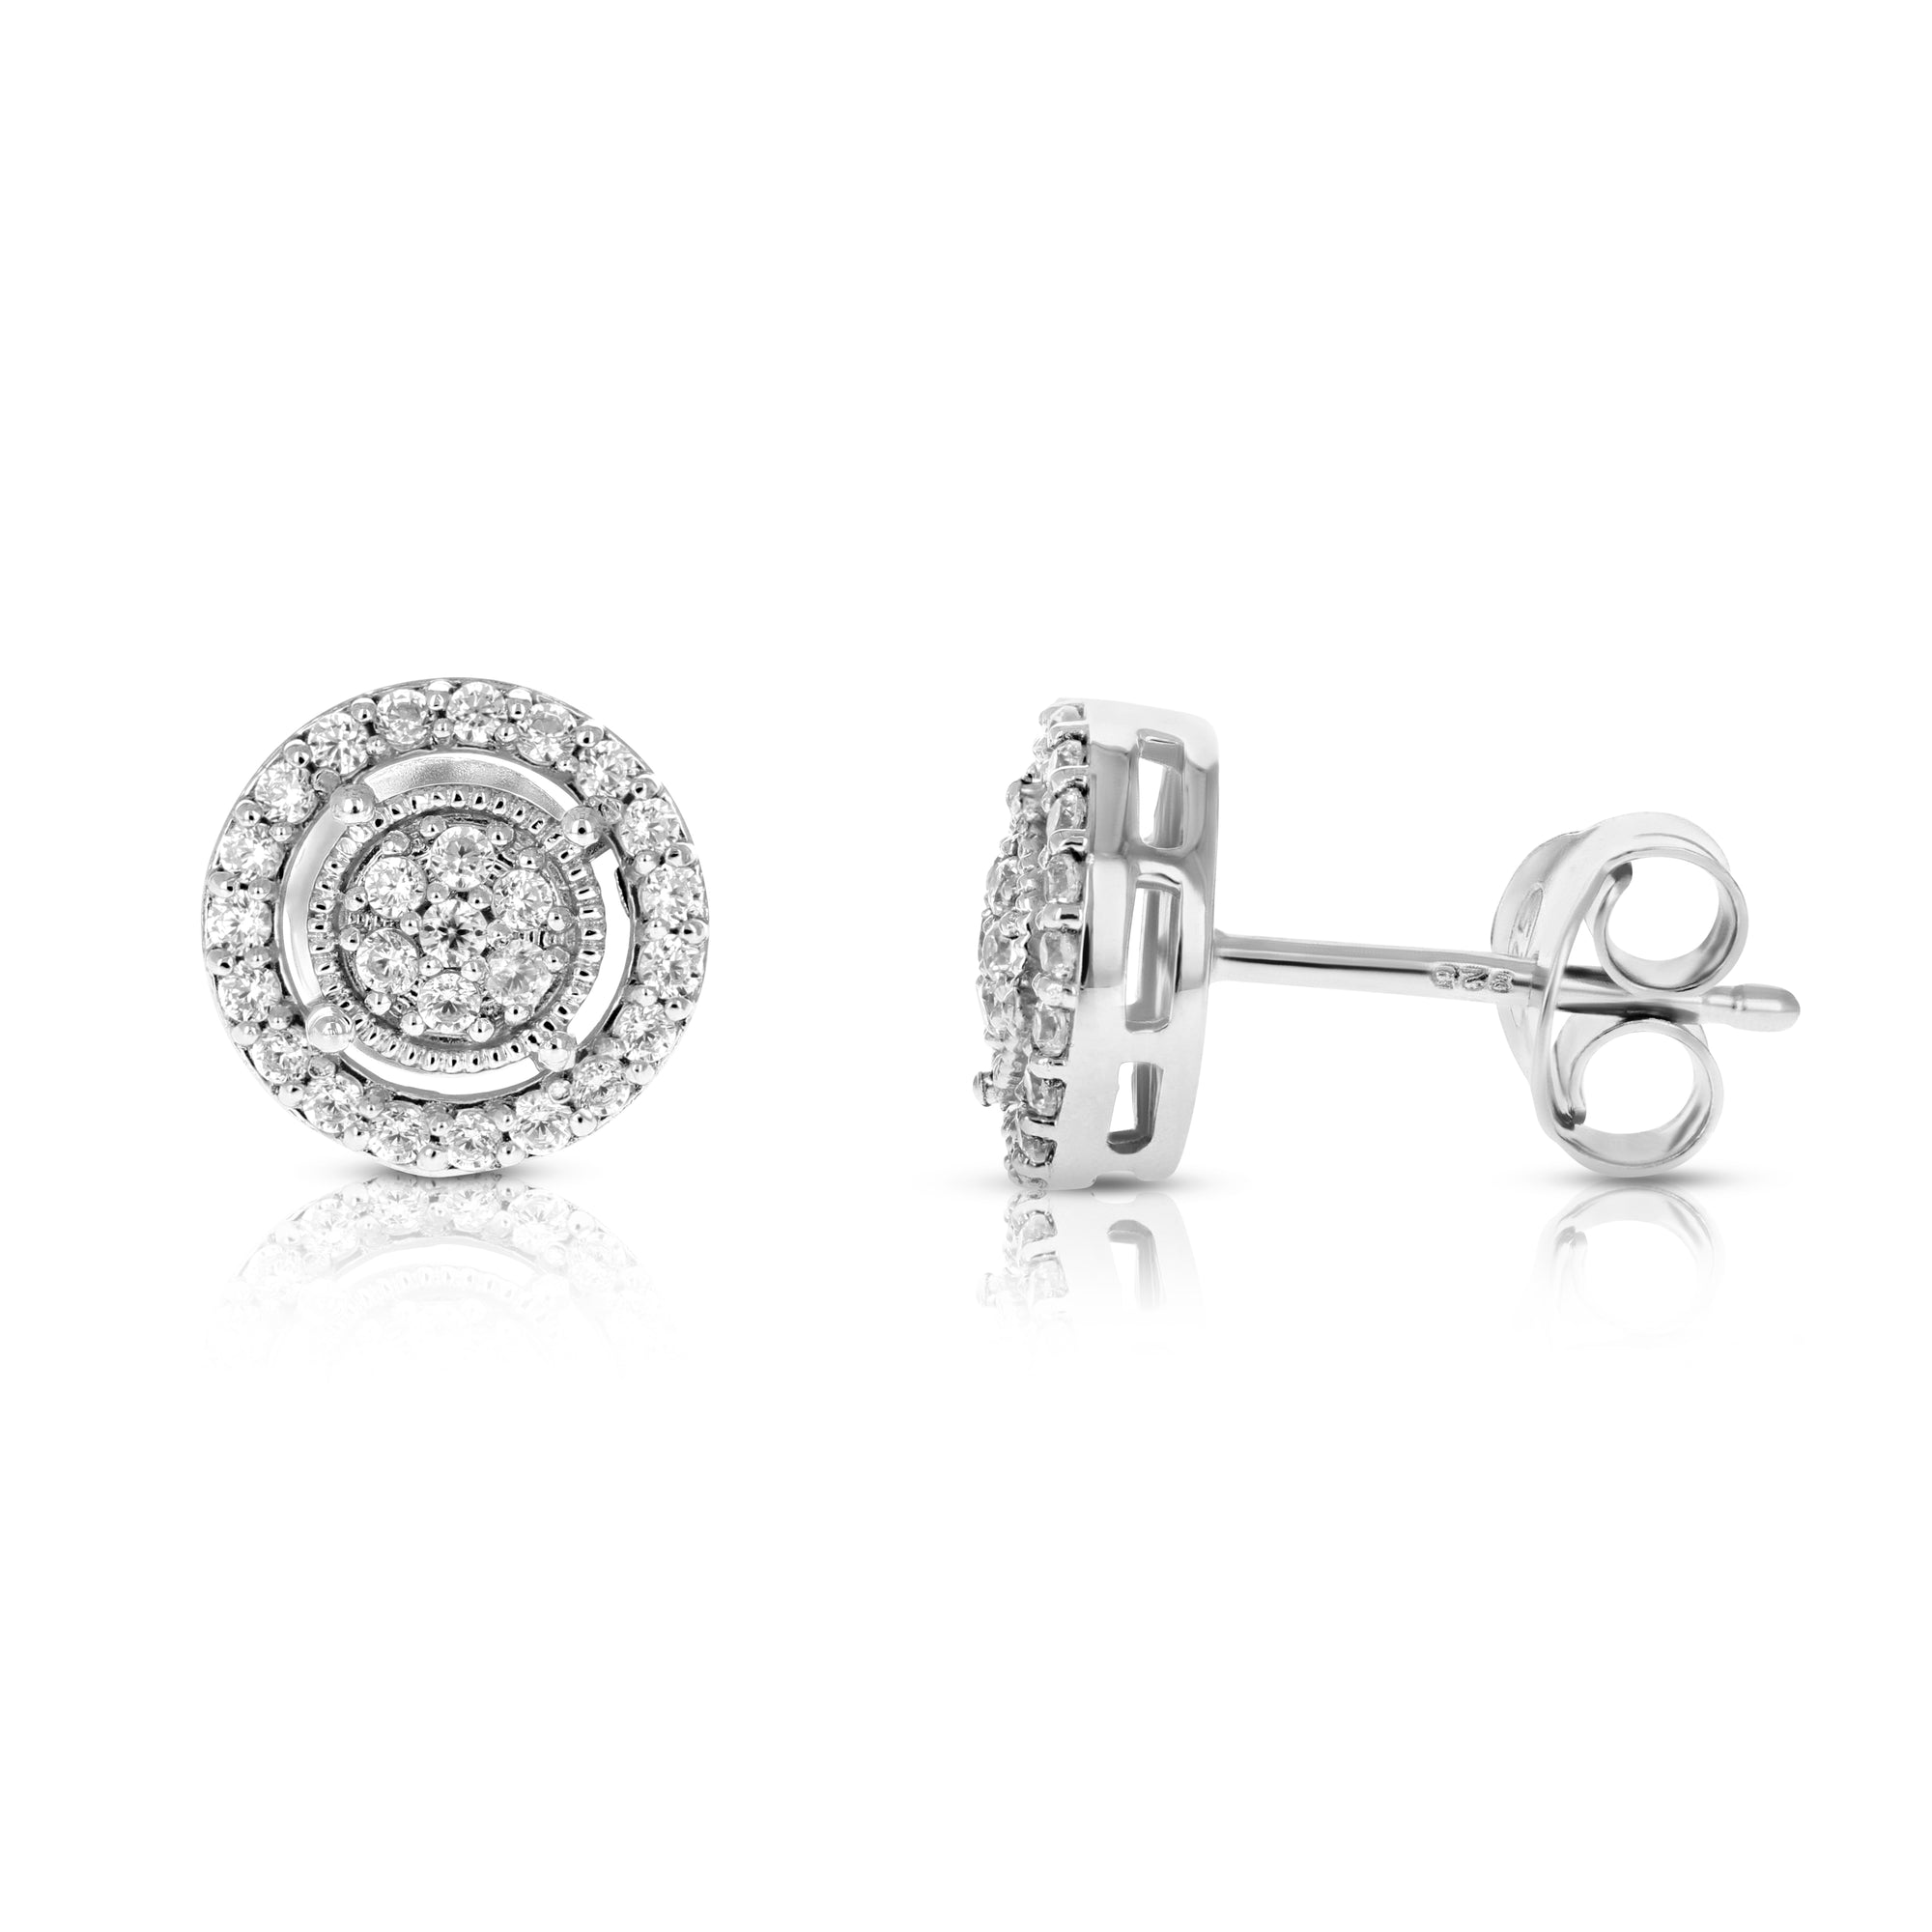 1/2 cttw Diamond Stud Earrings Composite in .925 Sterling Silver With Rhodium